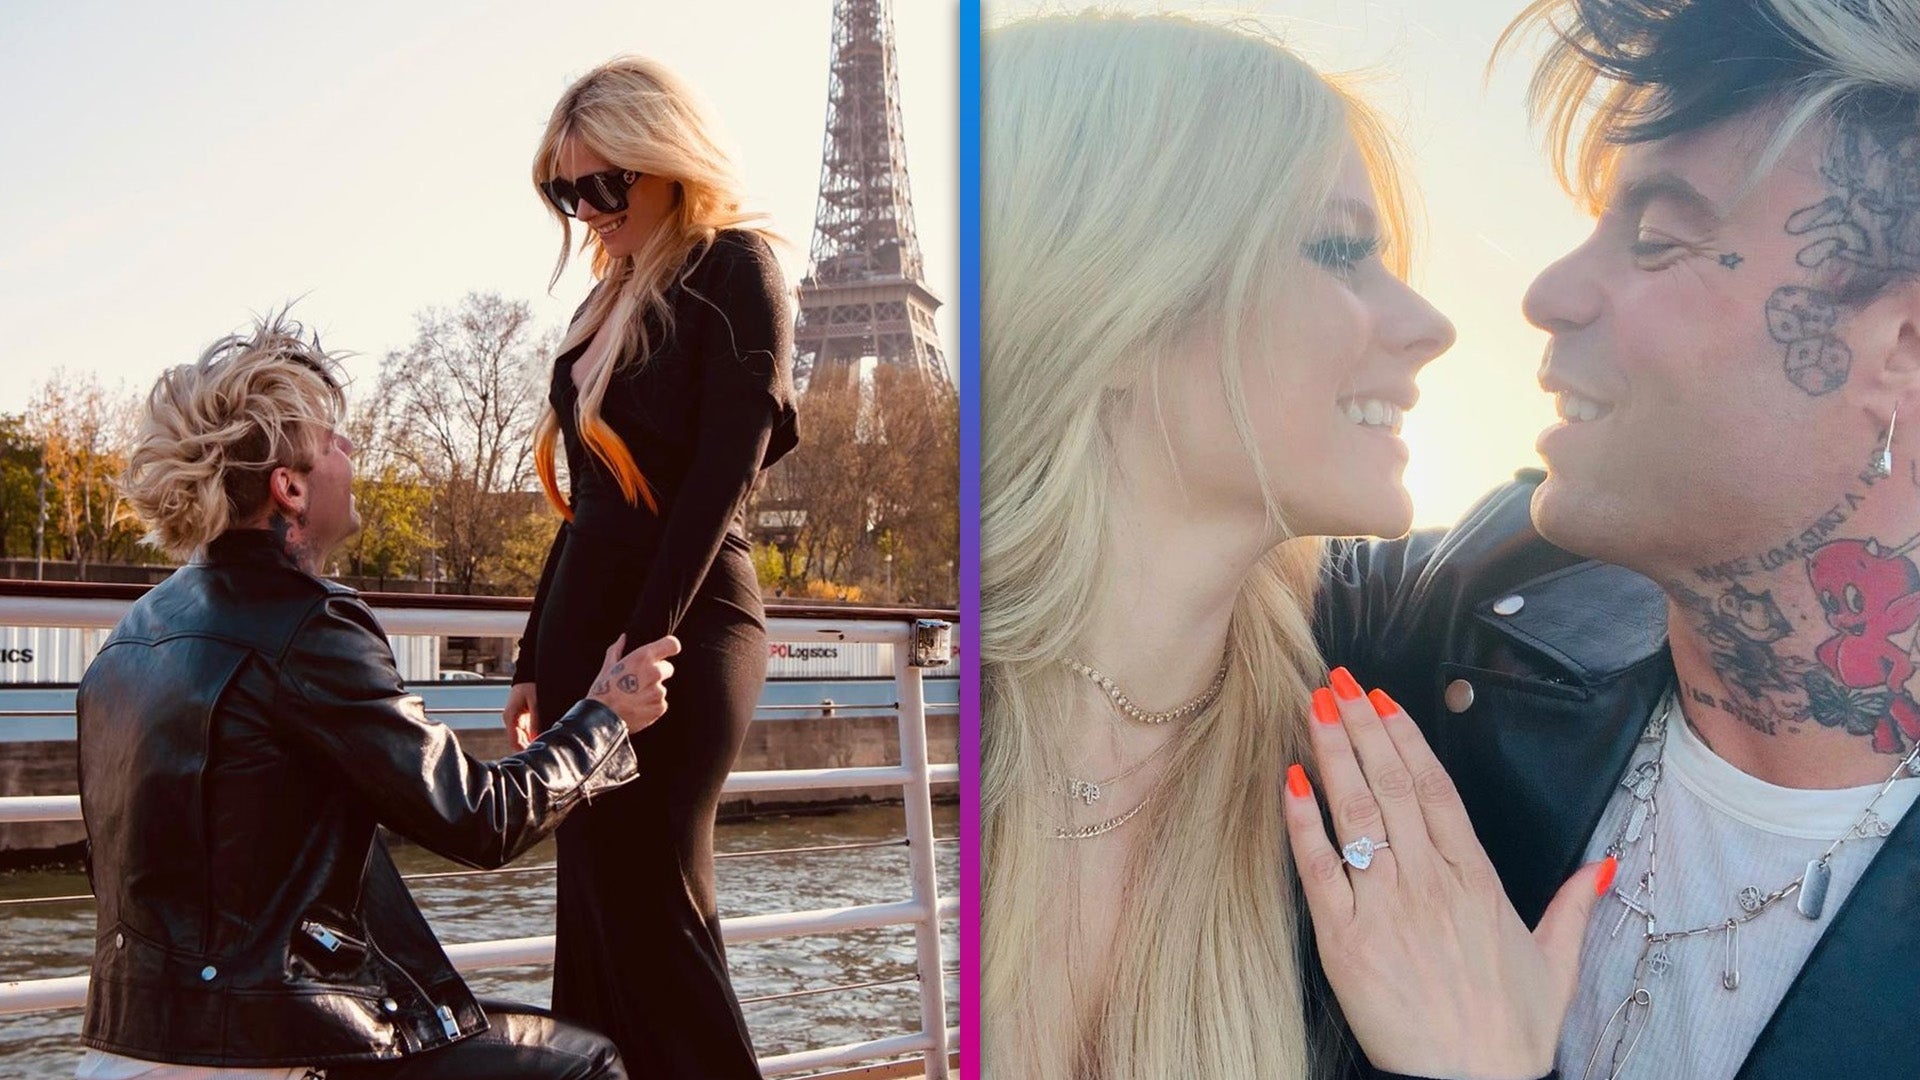 Avril Lavigne Is Engaged to Mod Sun! pic